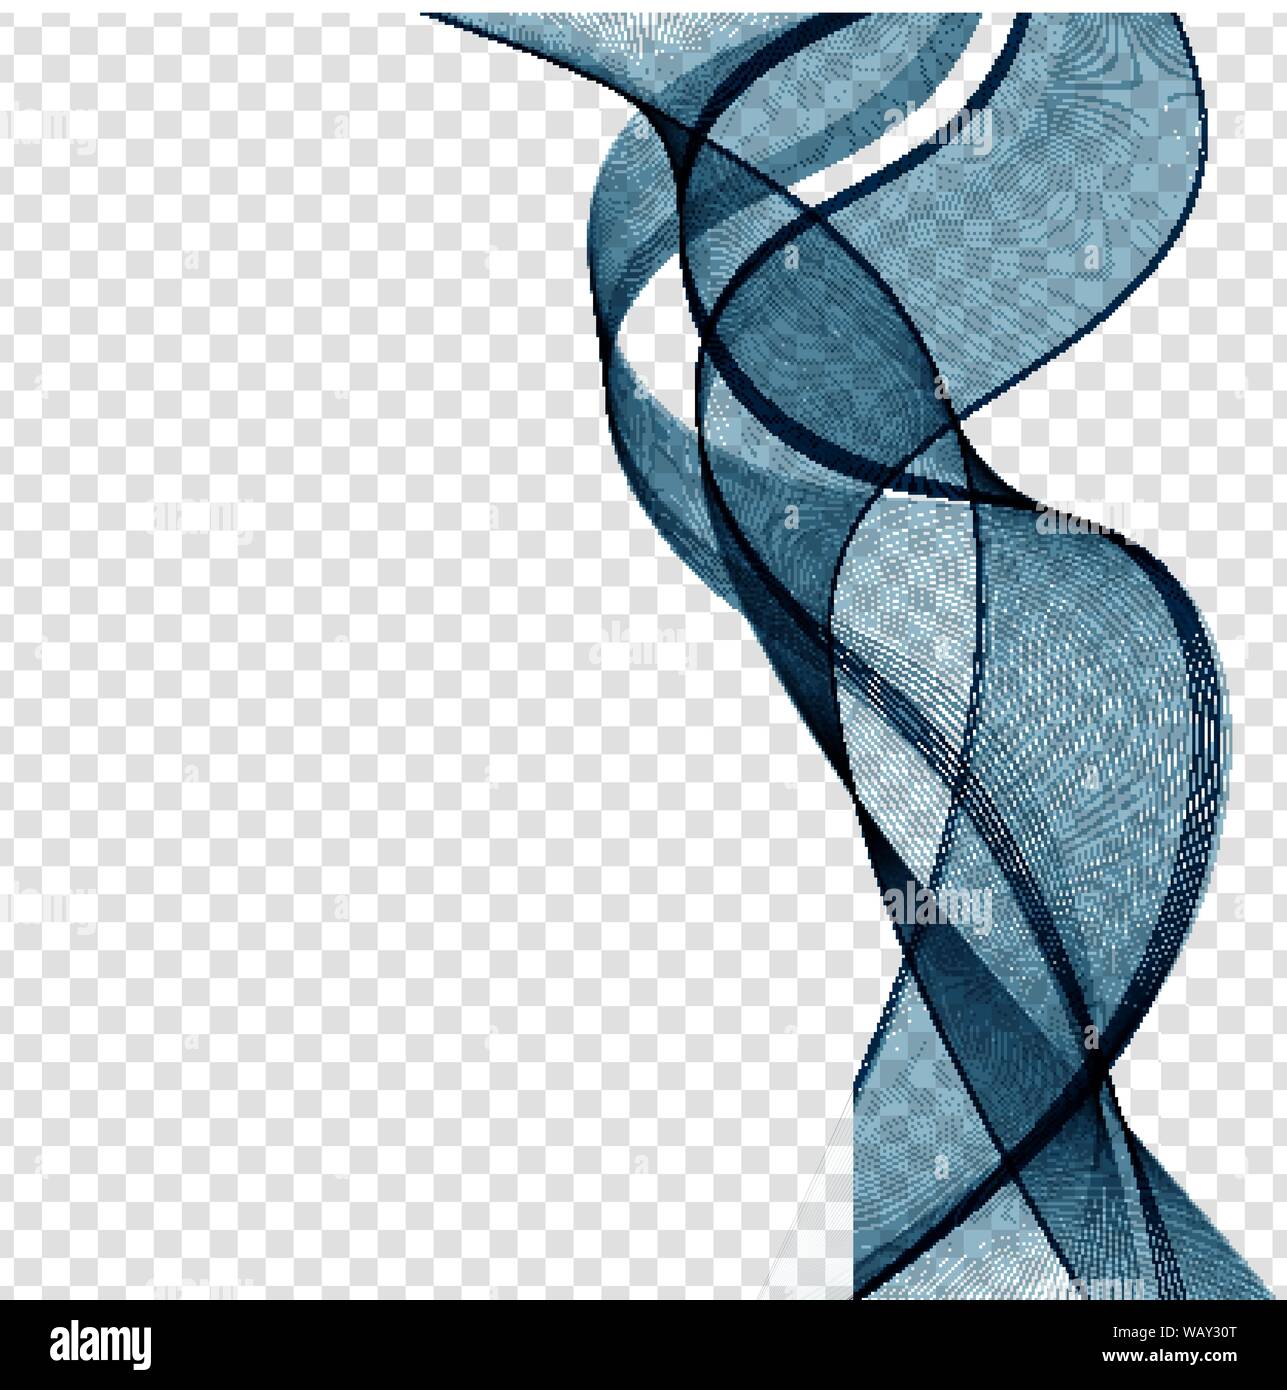 Abstract Blue Wave Vector Illustration Stock Vector Image & Art - Alamy